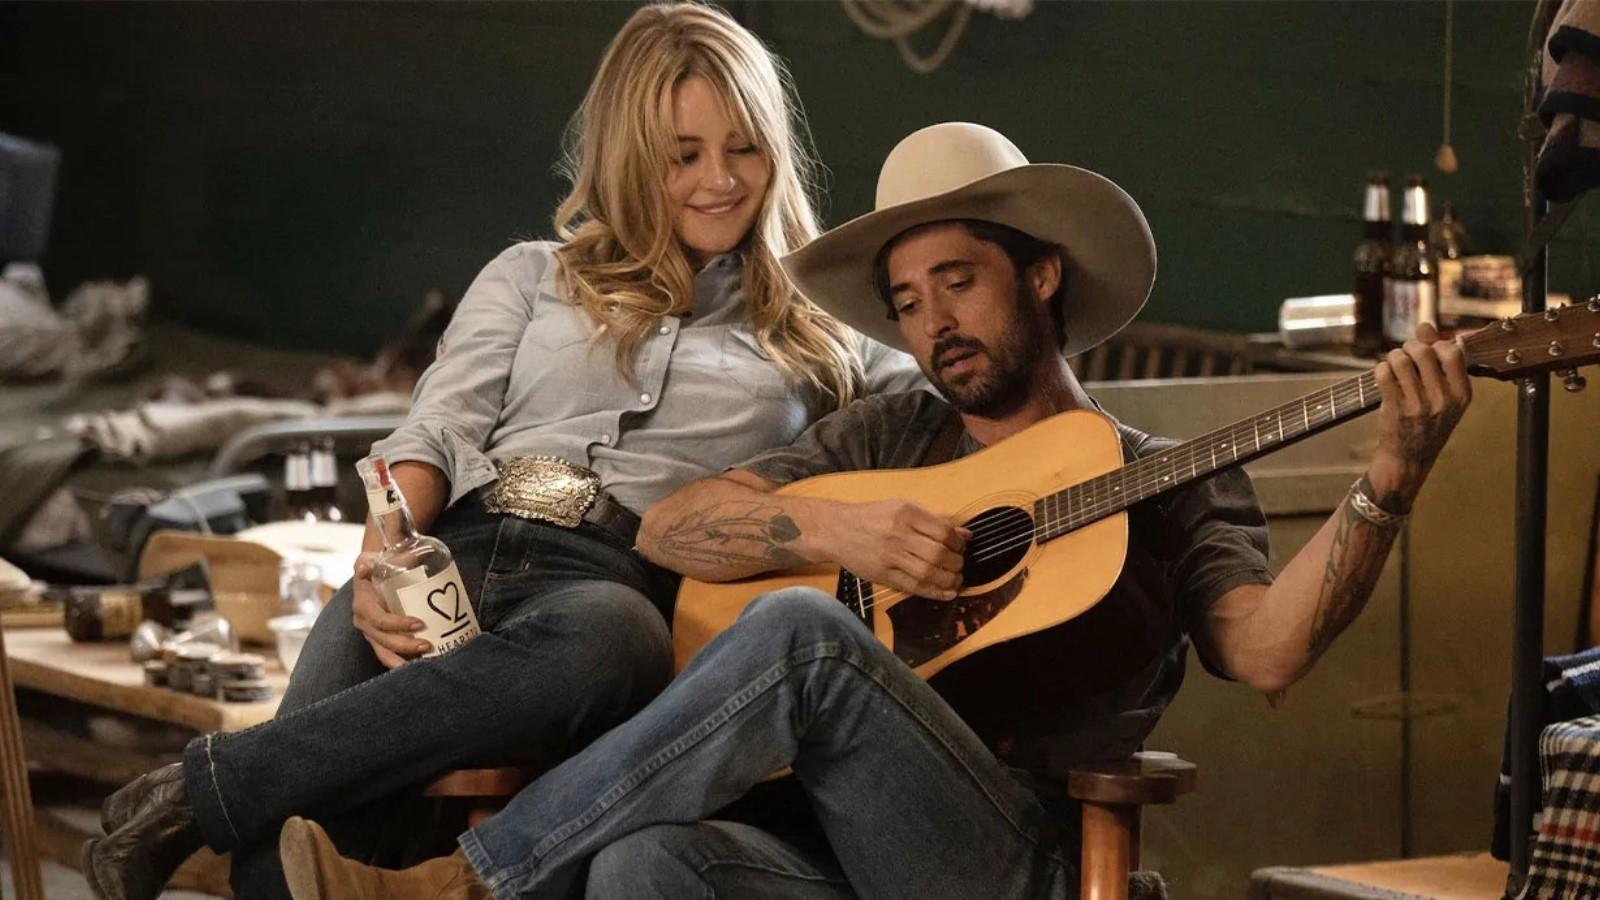 Hassie Harrison as Laramie and Ryan Bingham as Walker on Yellowstone, sitting on a chair with Walker holding a guitar